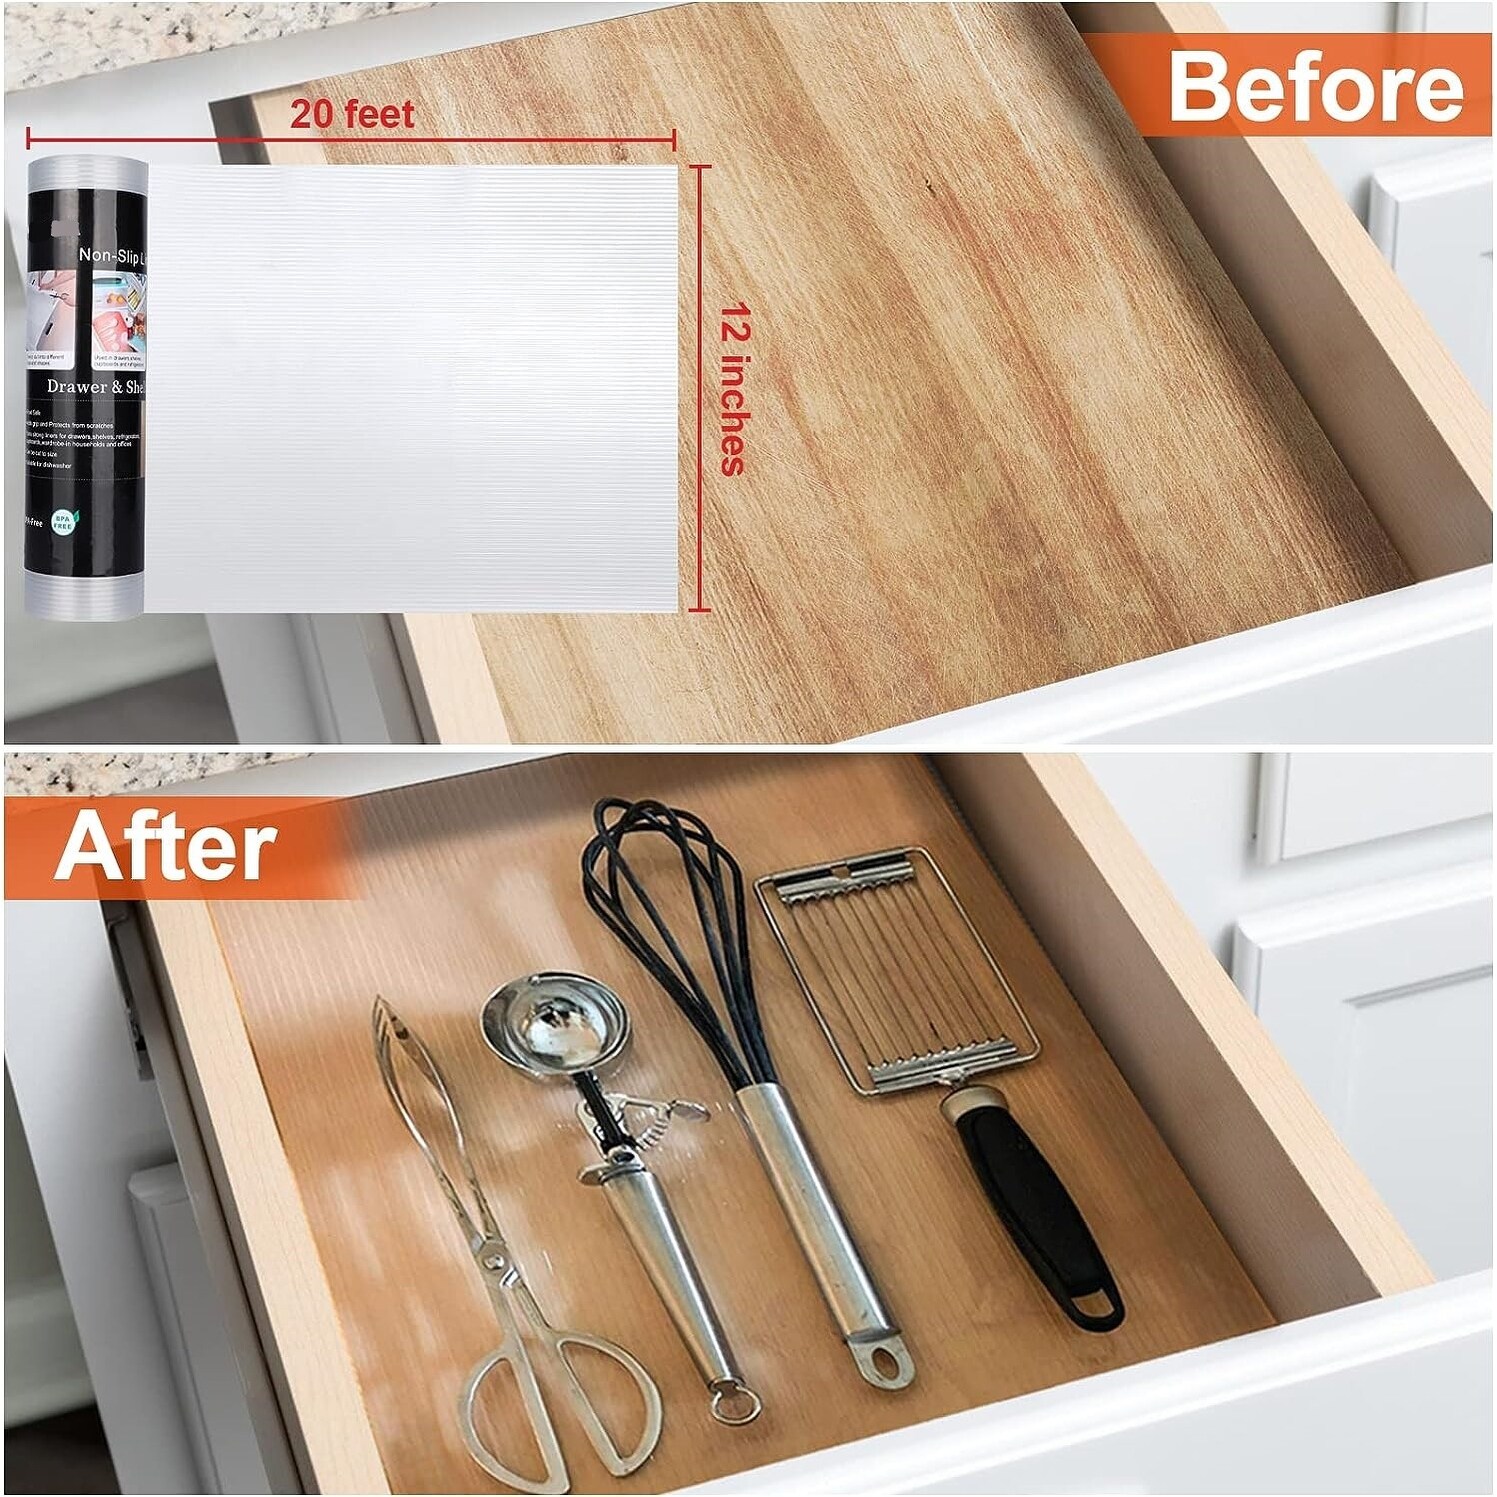 https://ak1.ostkcdn.com/images/products/is/images/direct/fcdd756e7b4bd33d6bcfa38f2ac5368bae5824b4/Glomen-Premium-Clear-Non-Adhesive-Non-Slip-Shelf-and-Drawer-Liner-12-Inches-x-20-FT.jpg